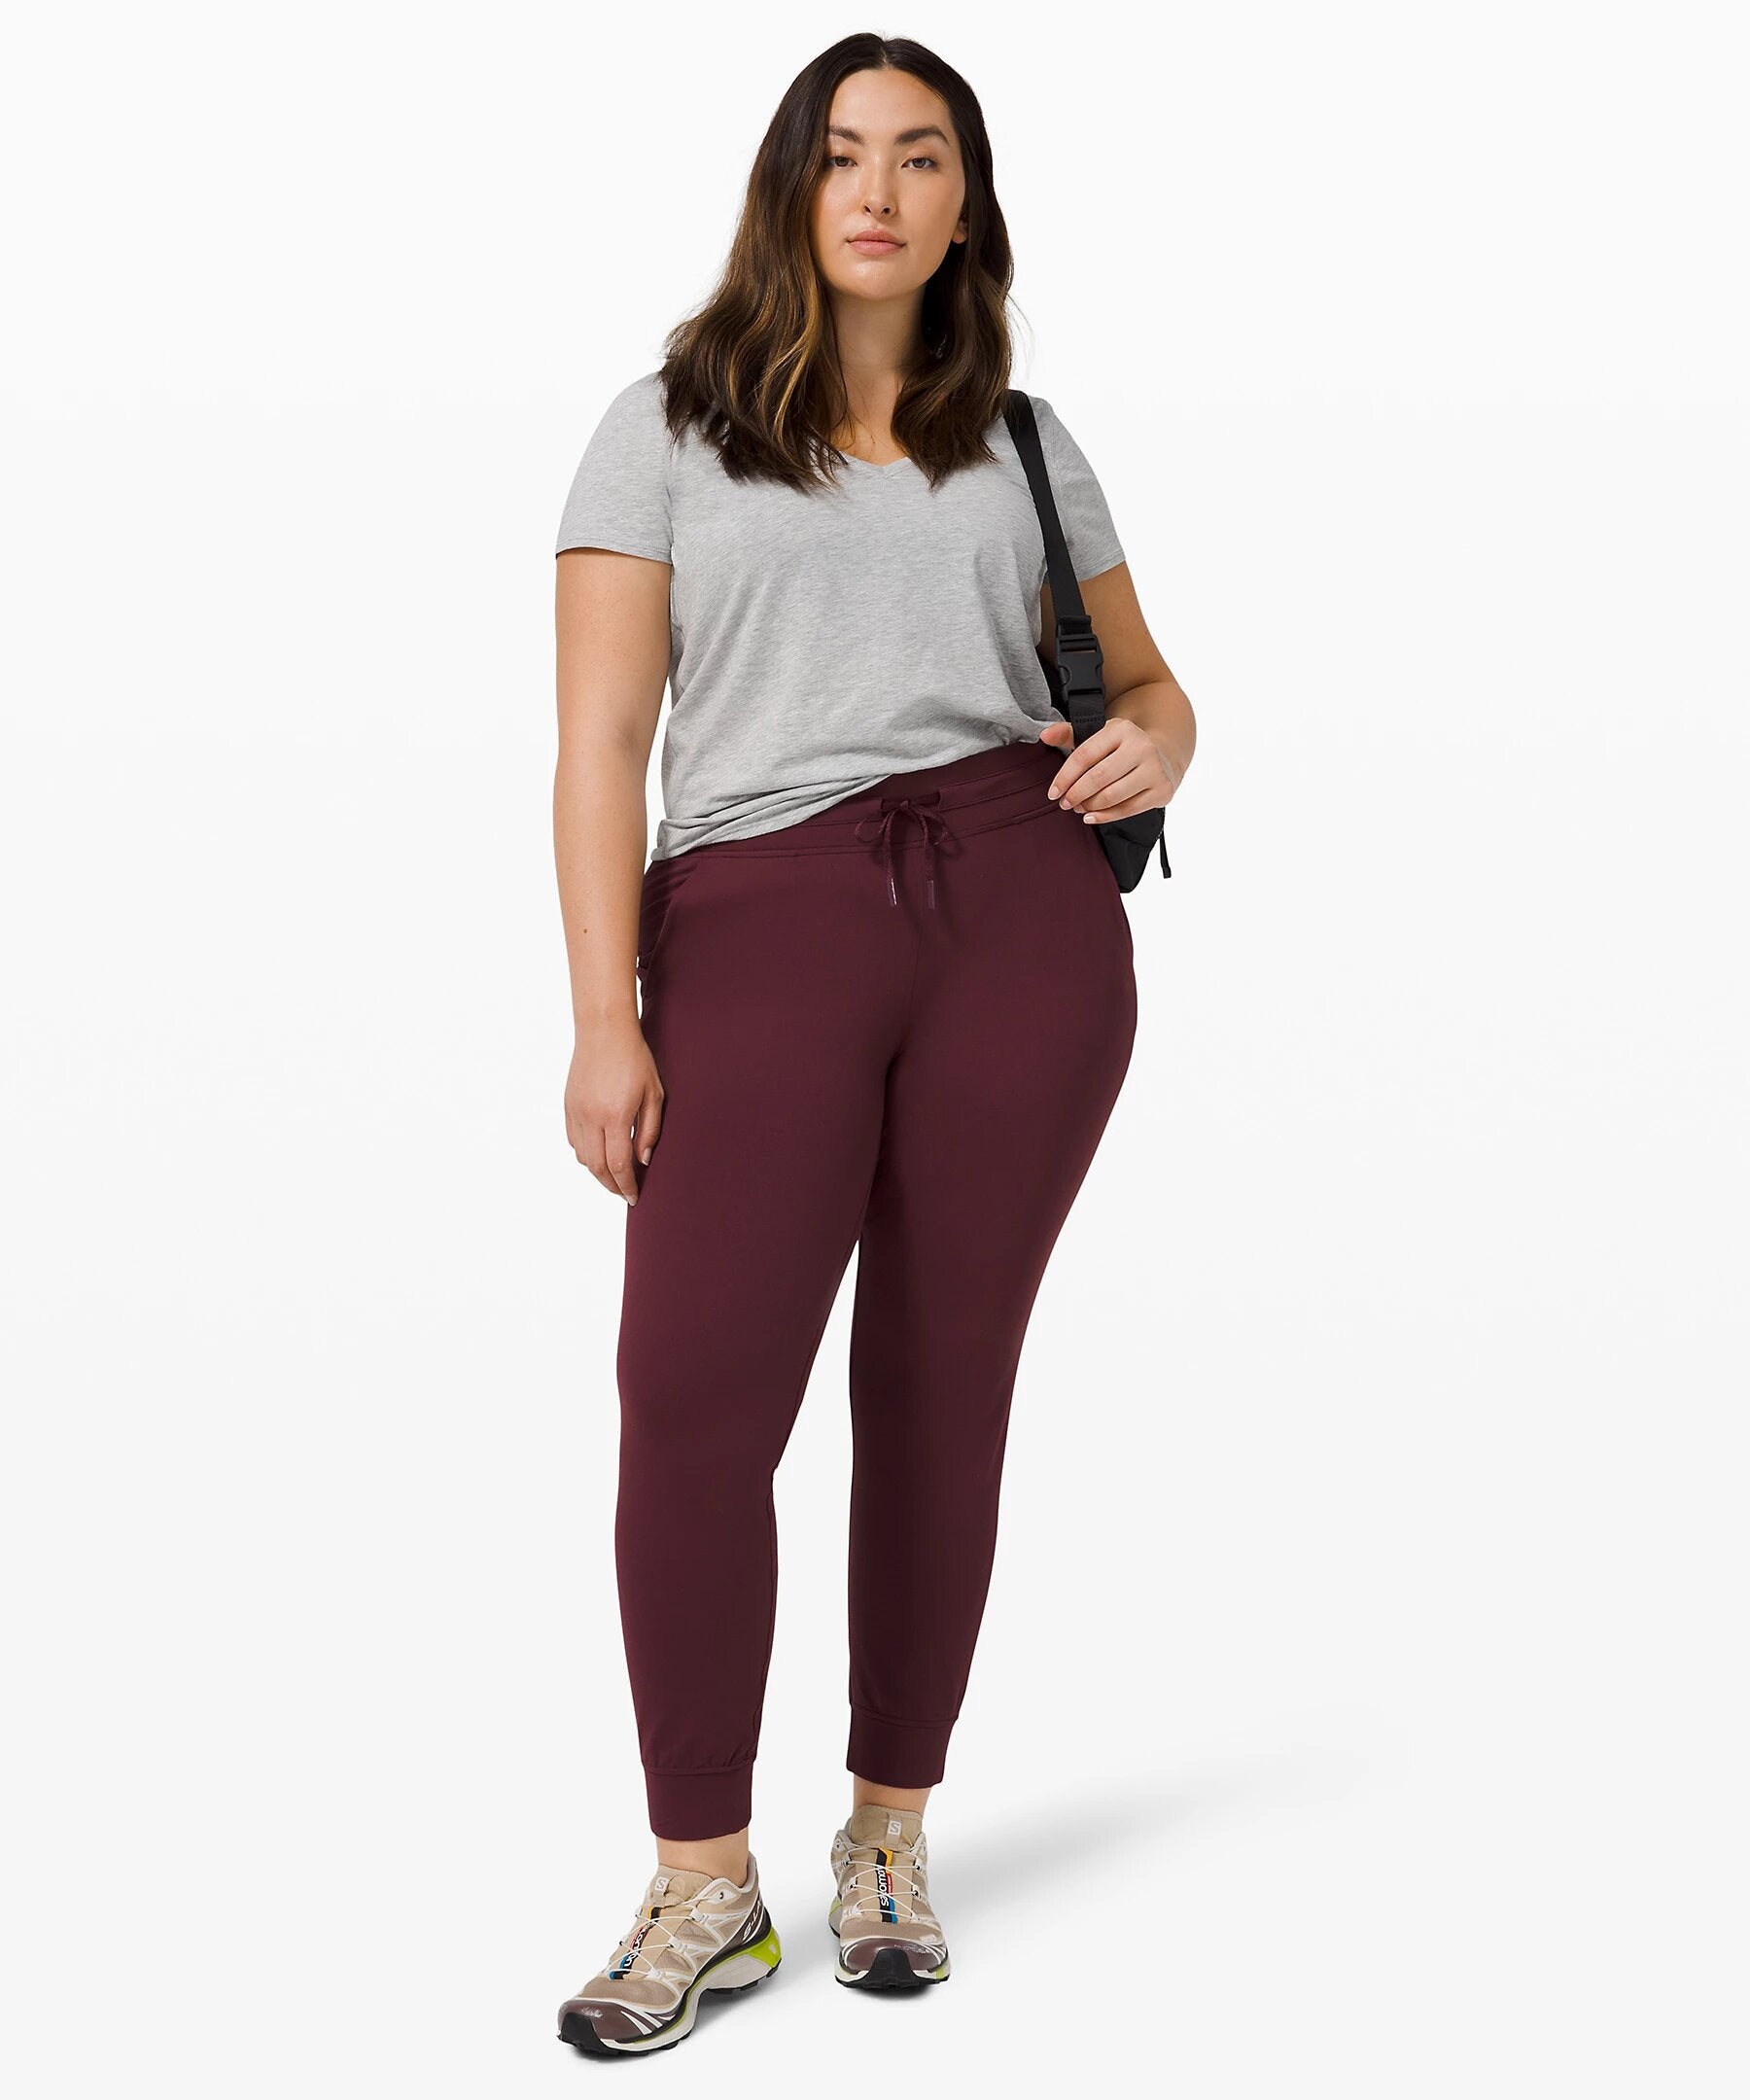 Best Joggers For Women That Are Soft, Stylish, & Chic